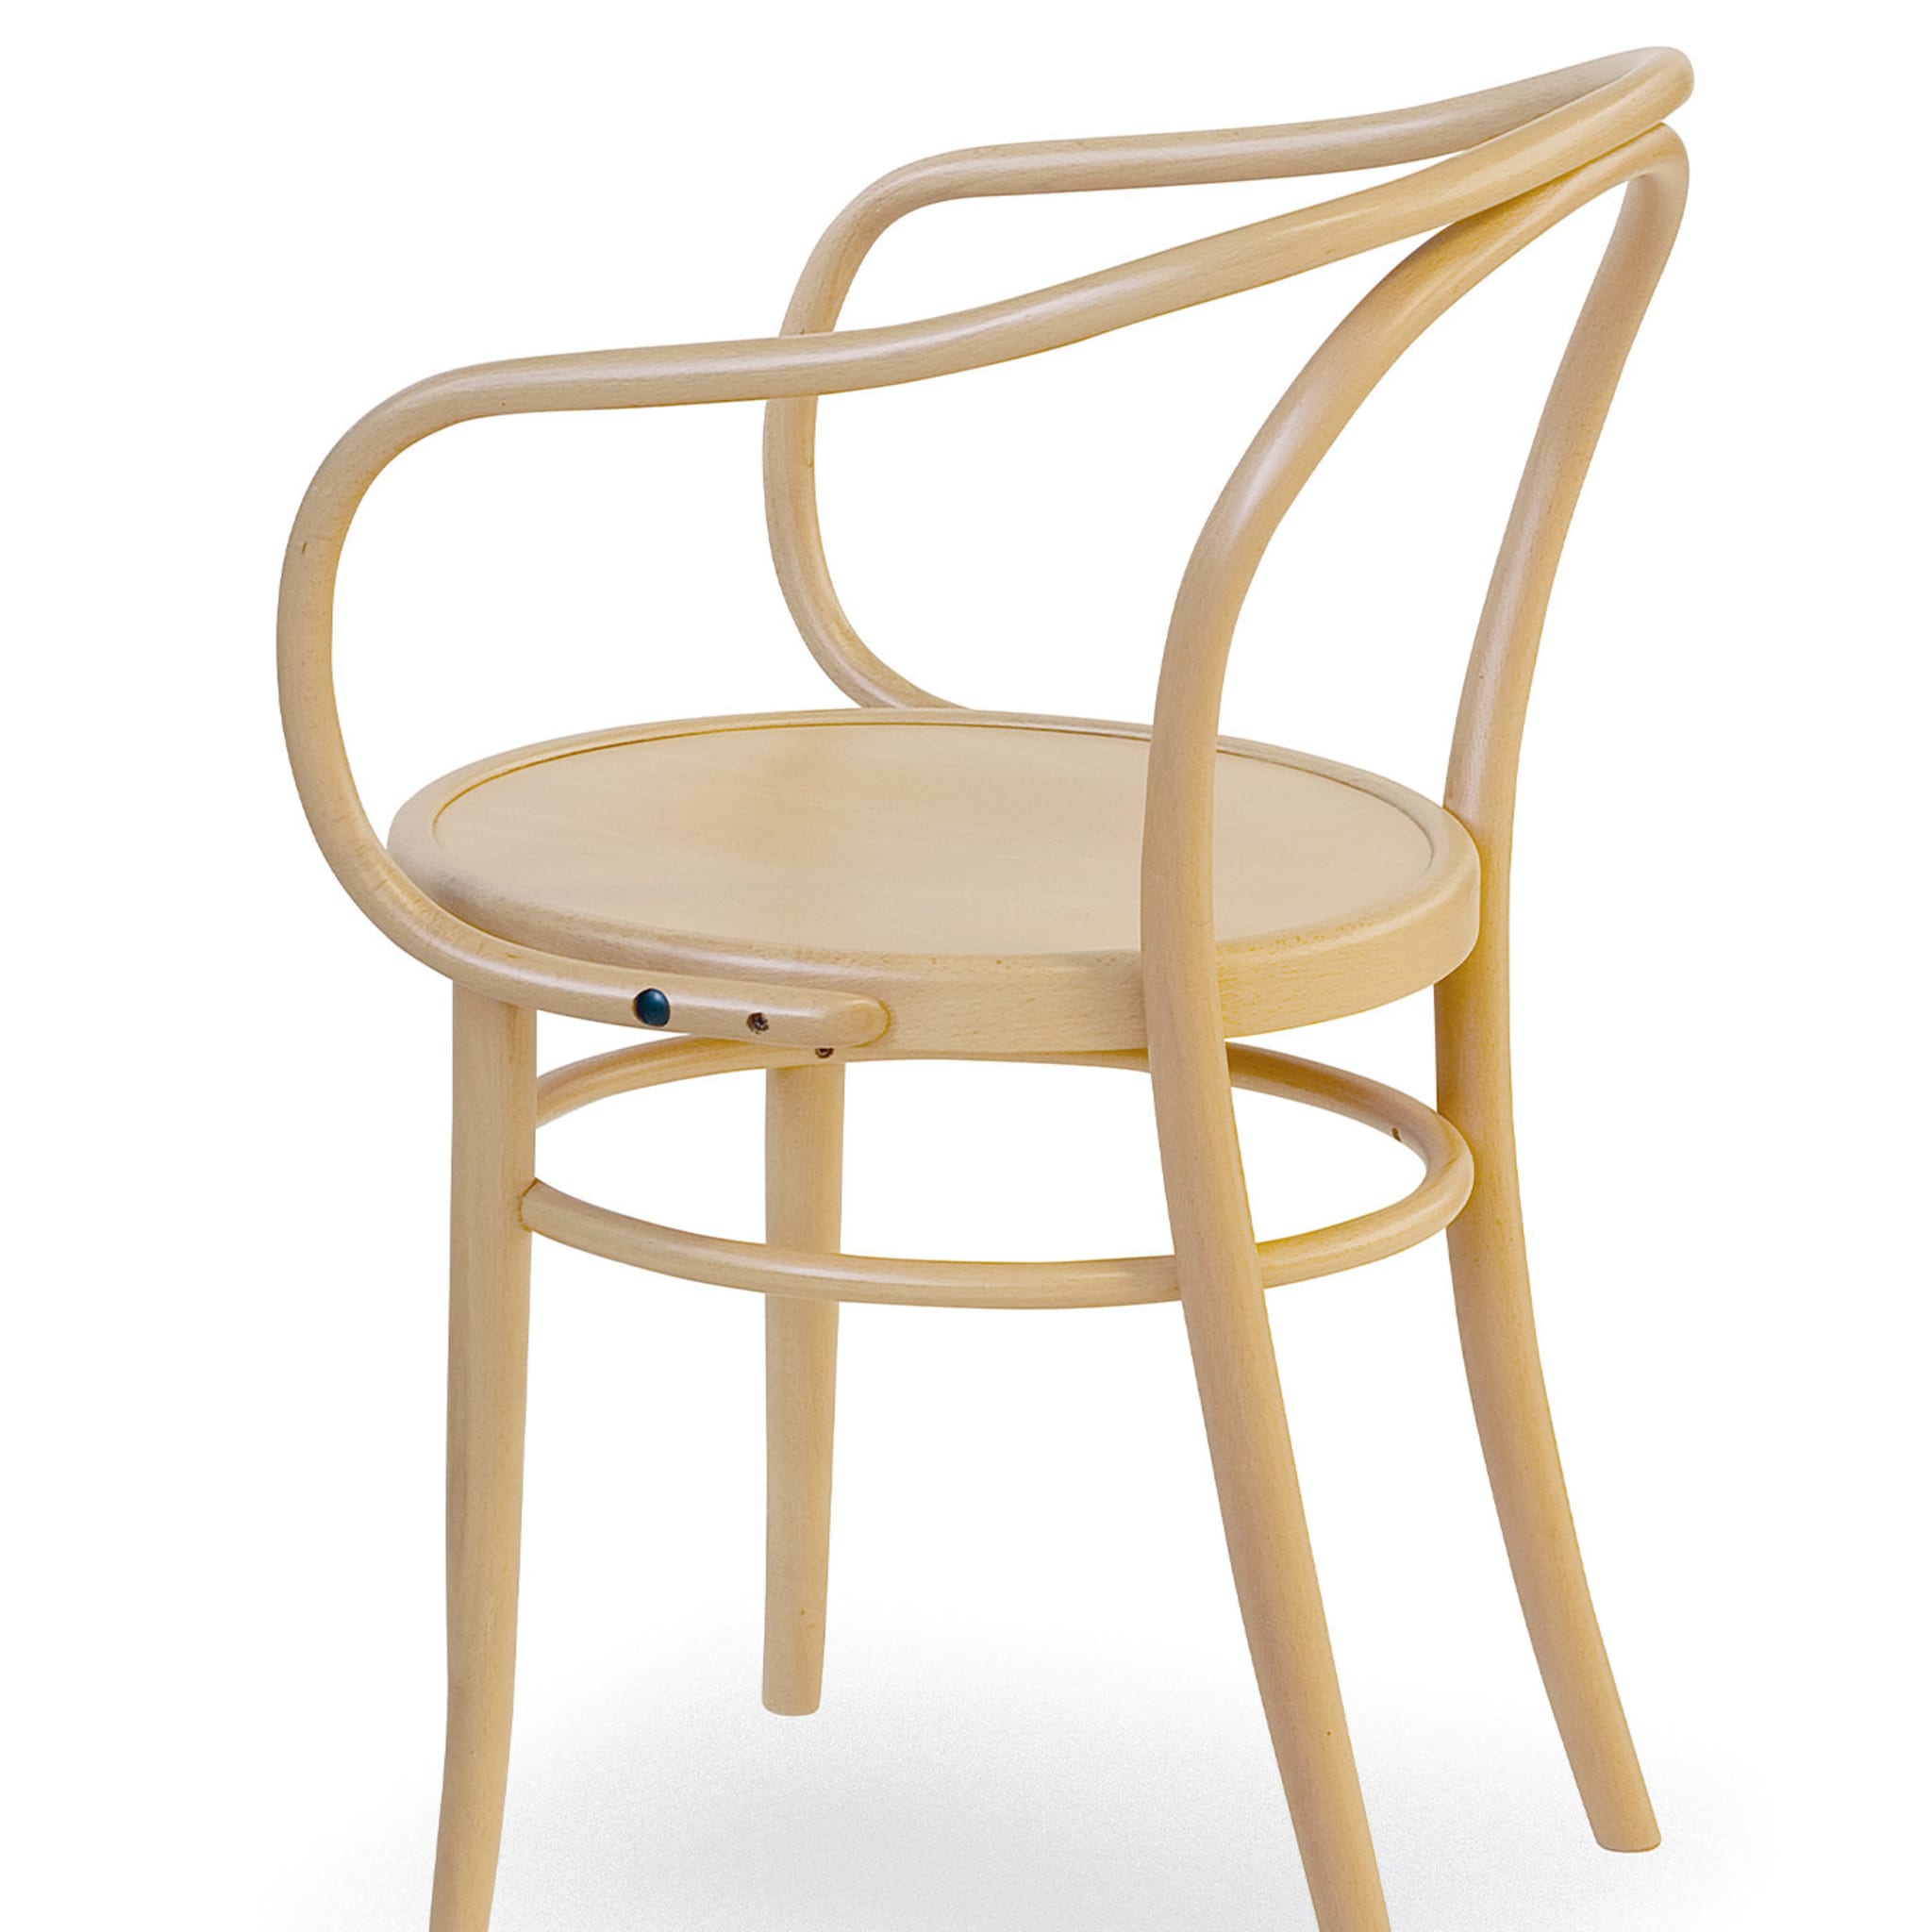 08 Beige Chair with Armrests - Alternative view 1